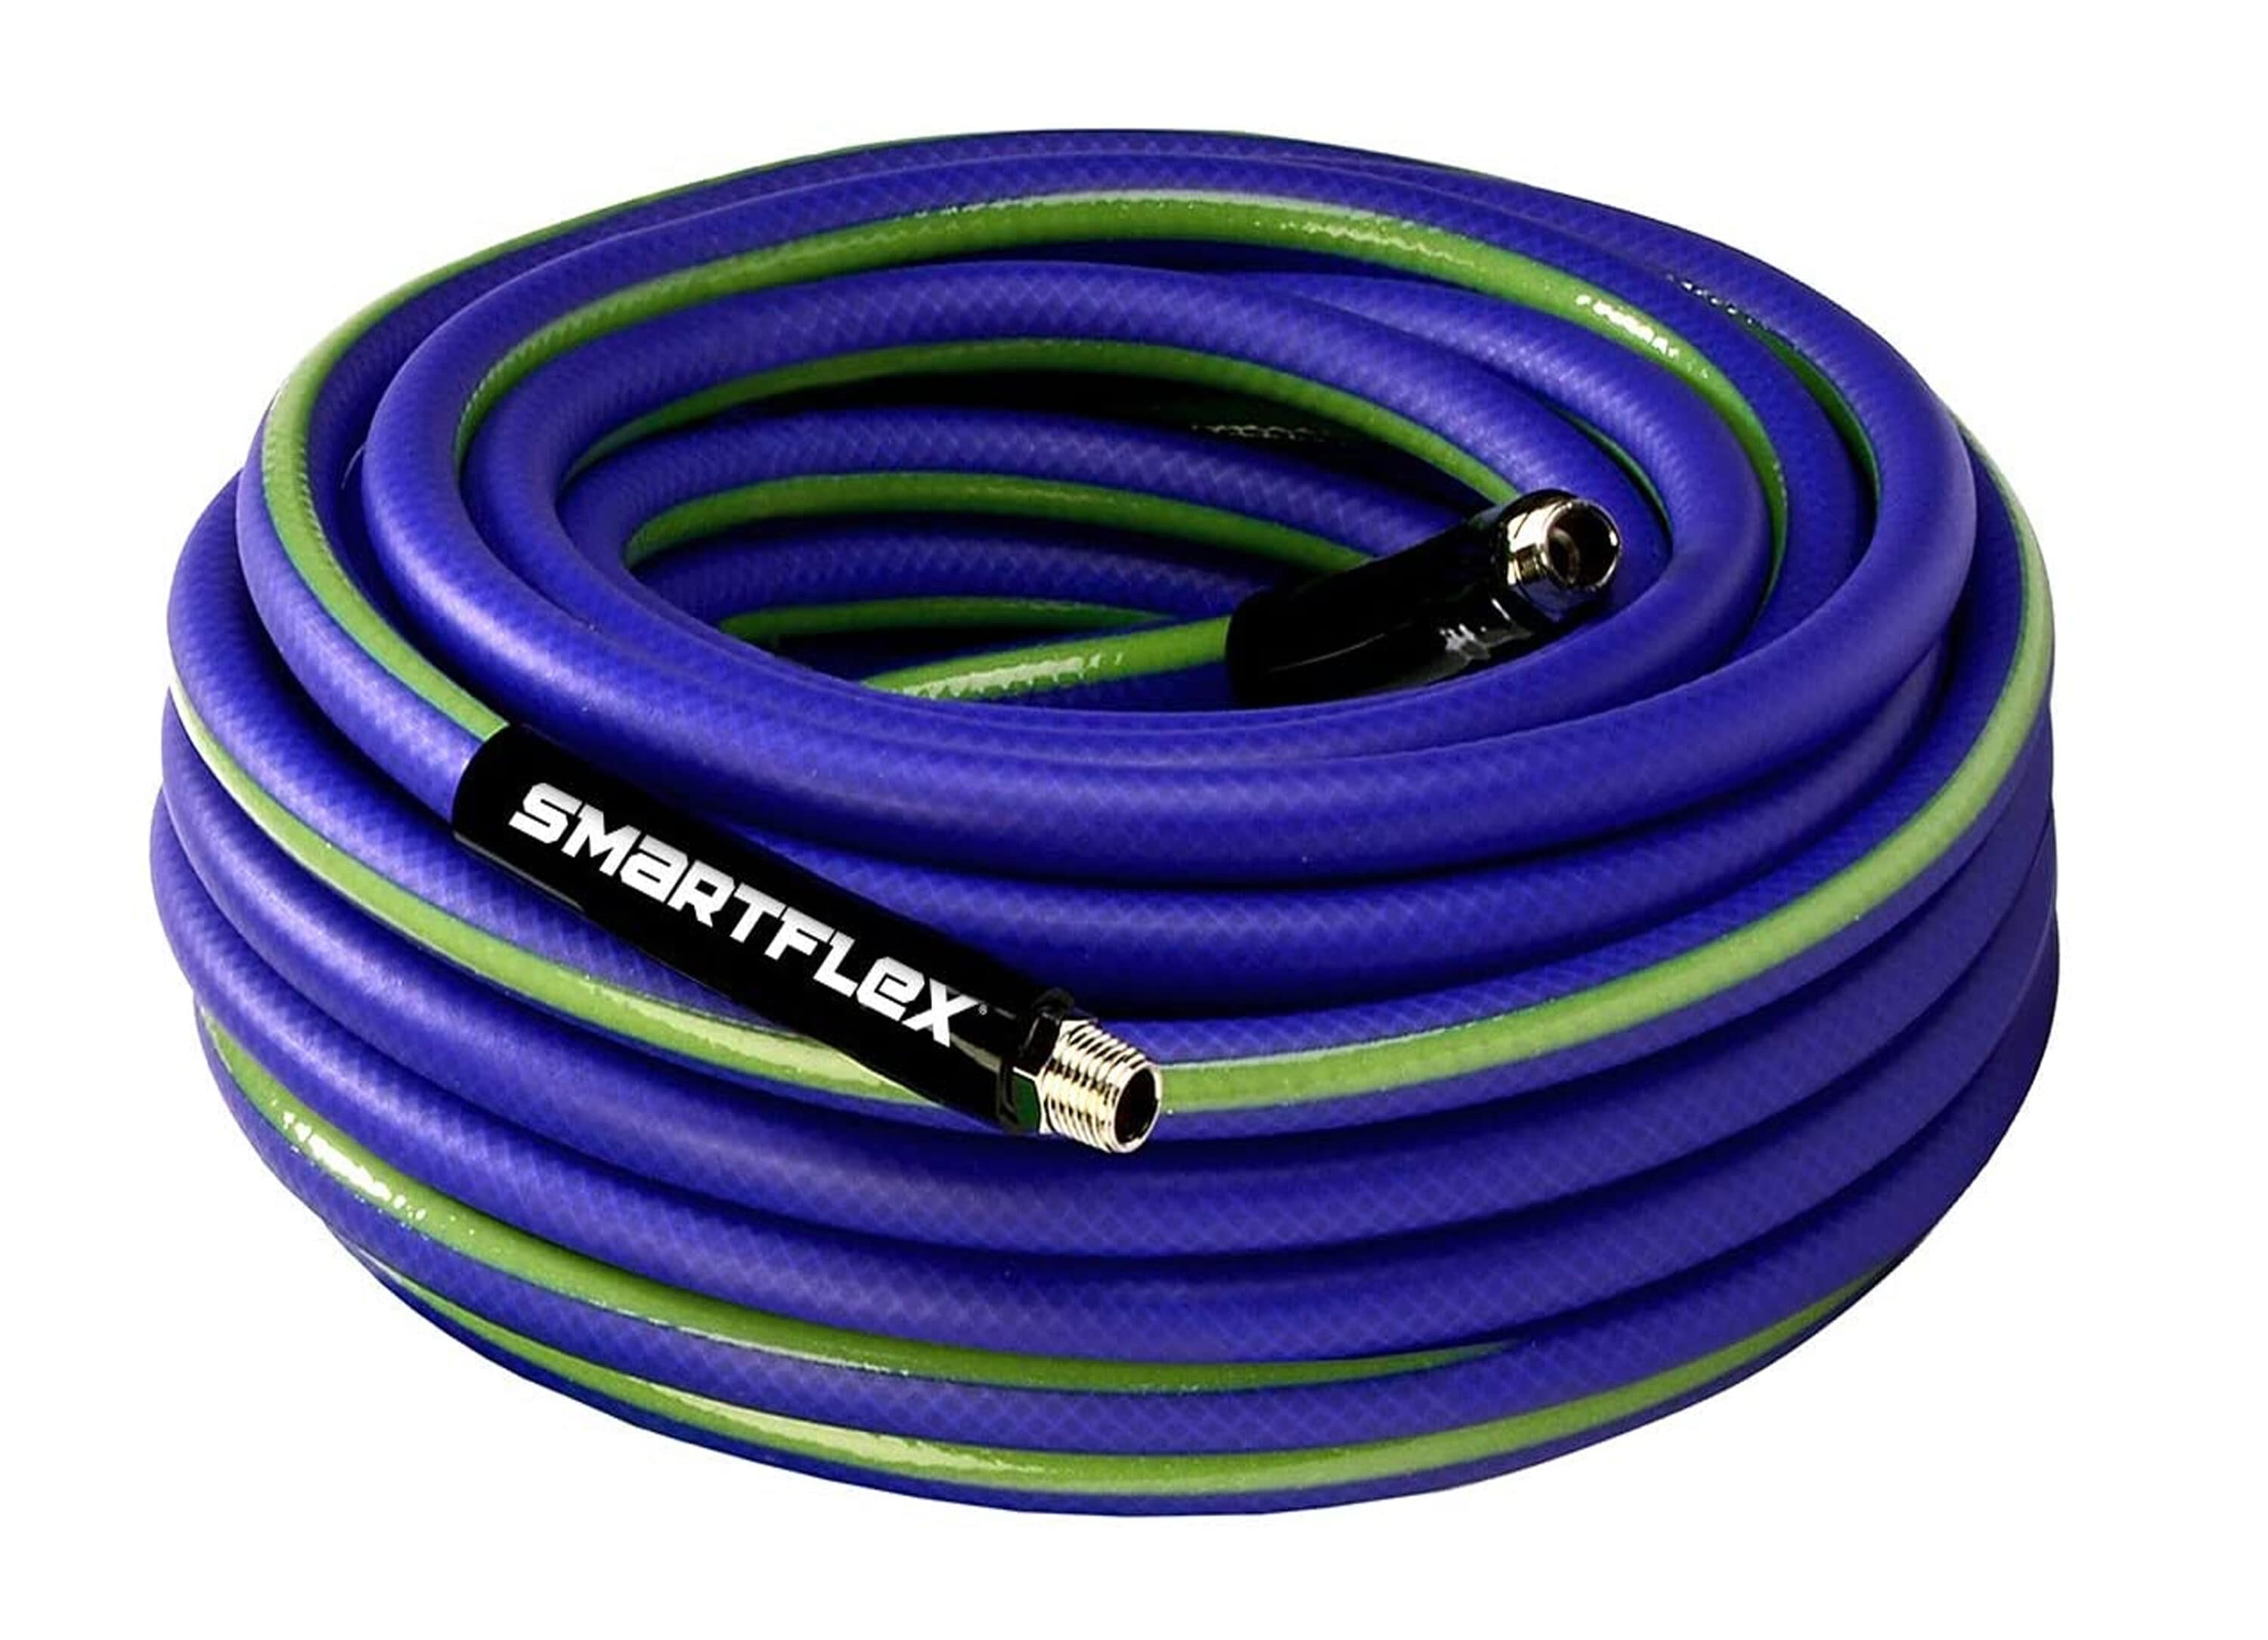 Flexzilla SmartFlex Air Hose Rubber 3/8-in x 50-ft HSFR3850BK2 in the Air  Compressor Hoses department at